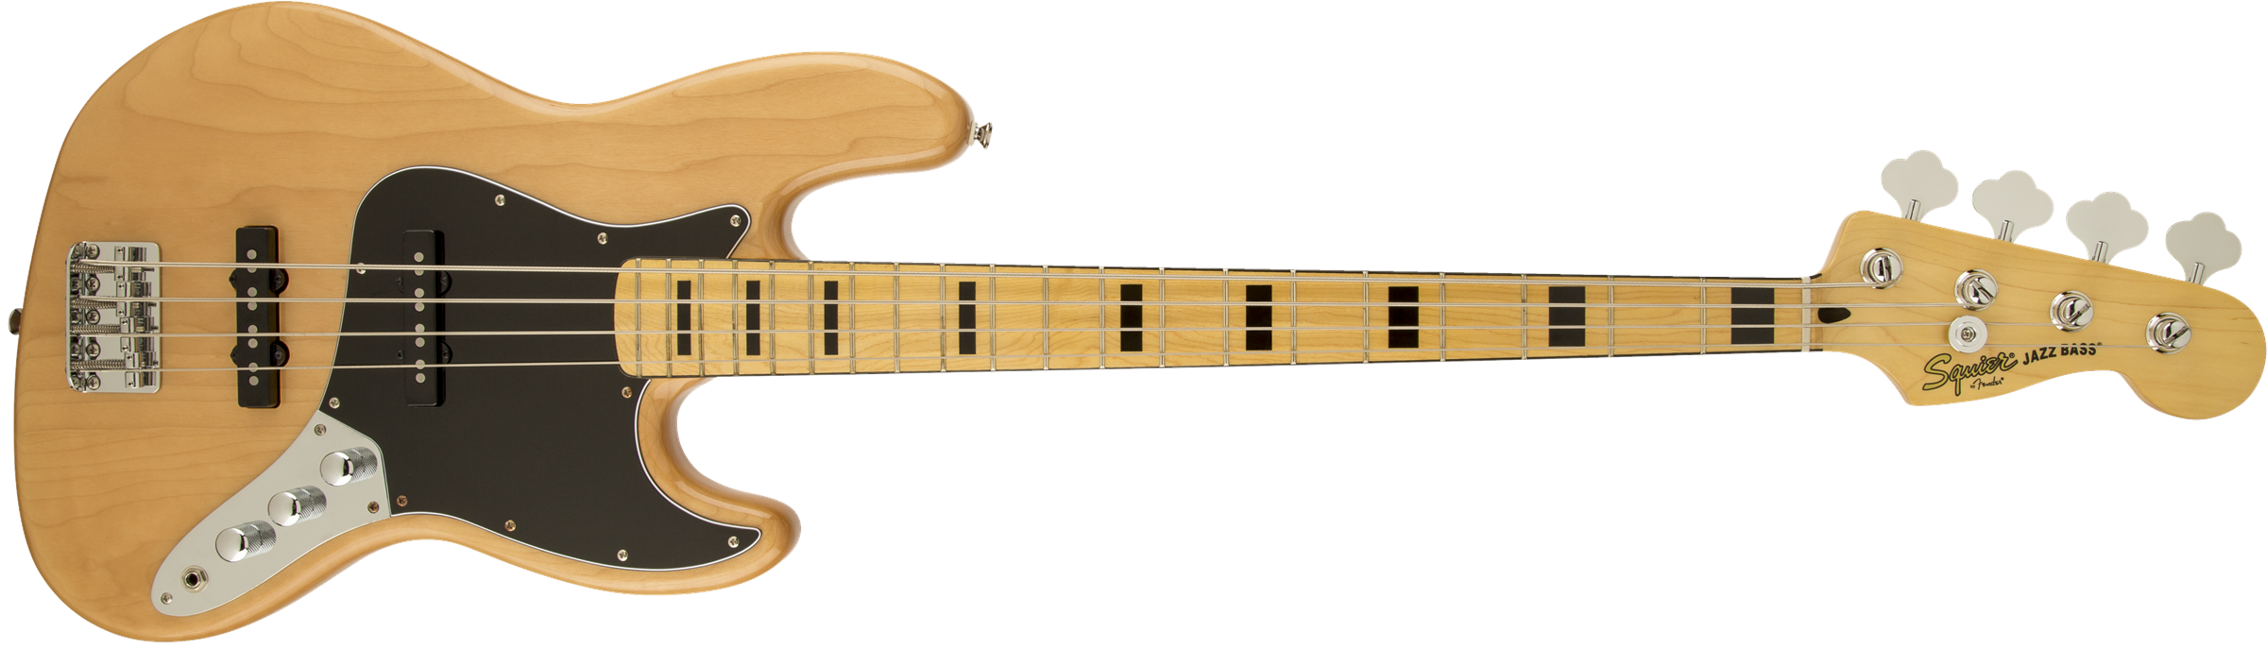 Squier By Fender - Vintage Modified 70's Jazz Bass - Elektrisk Bas (Natural)